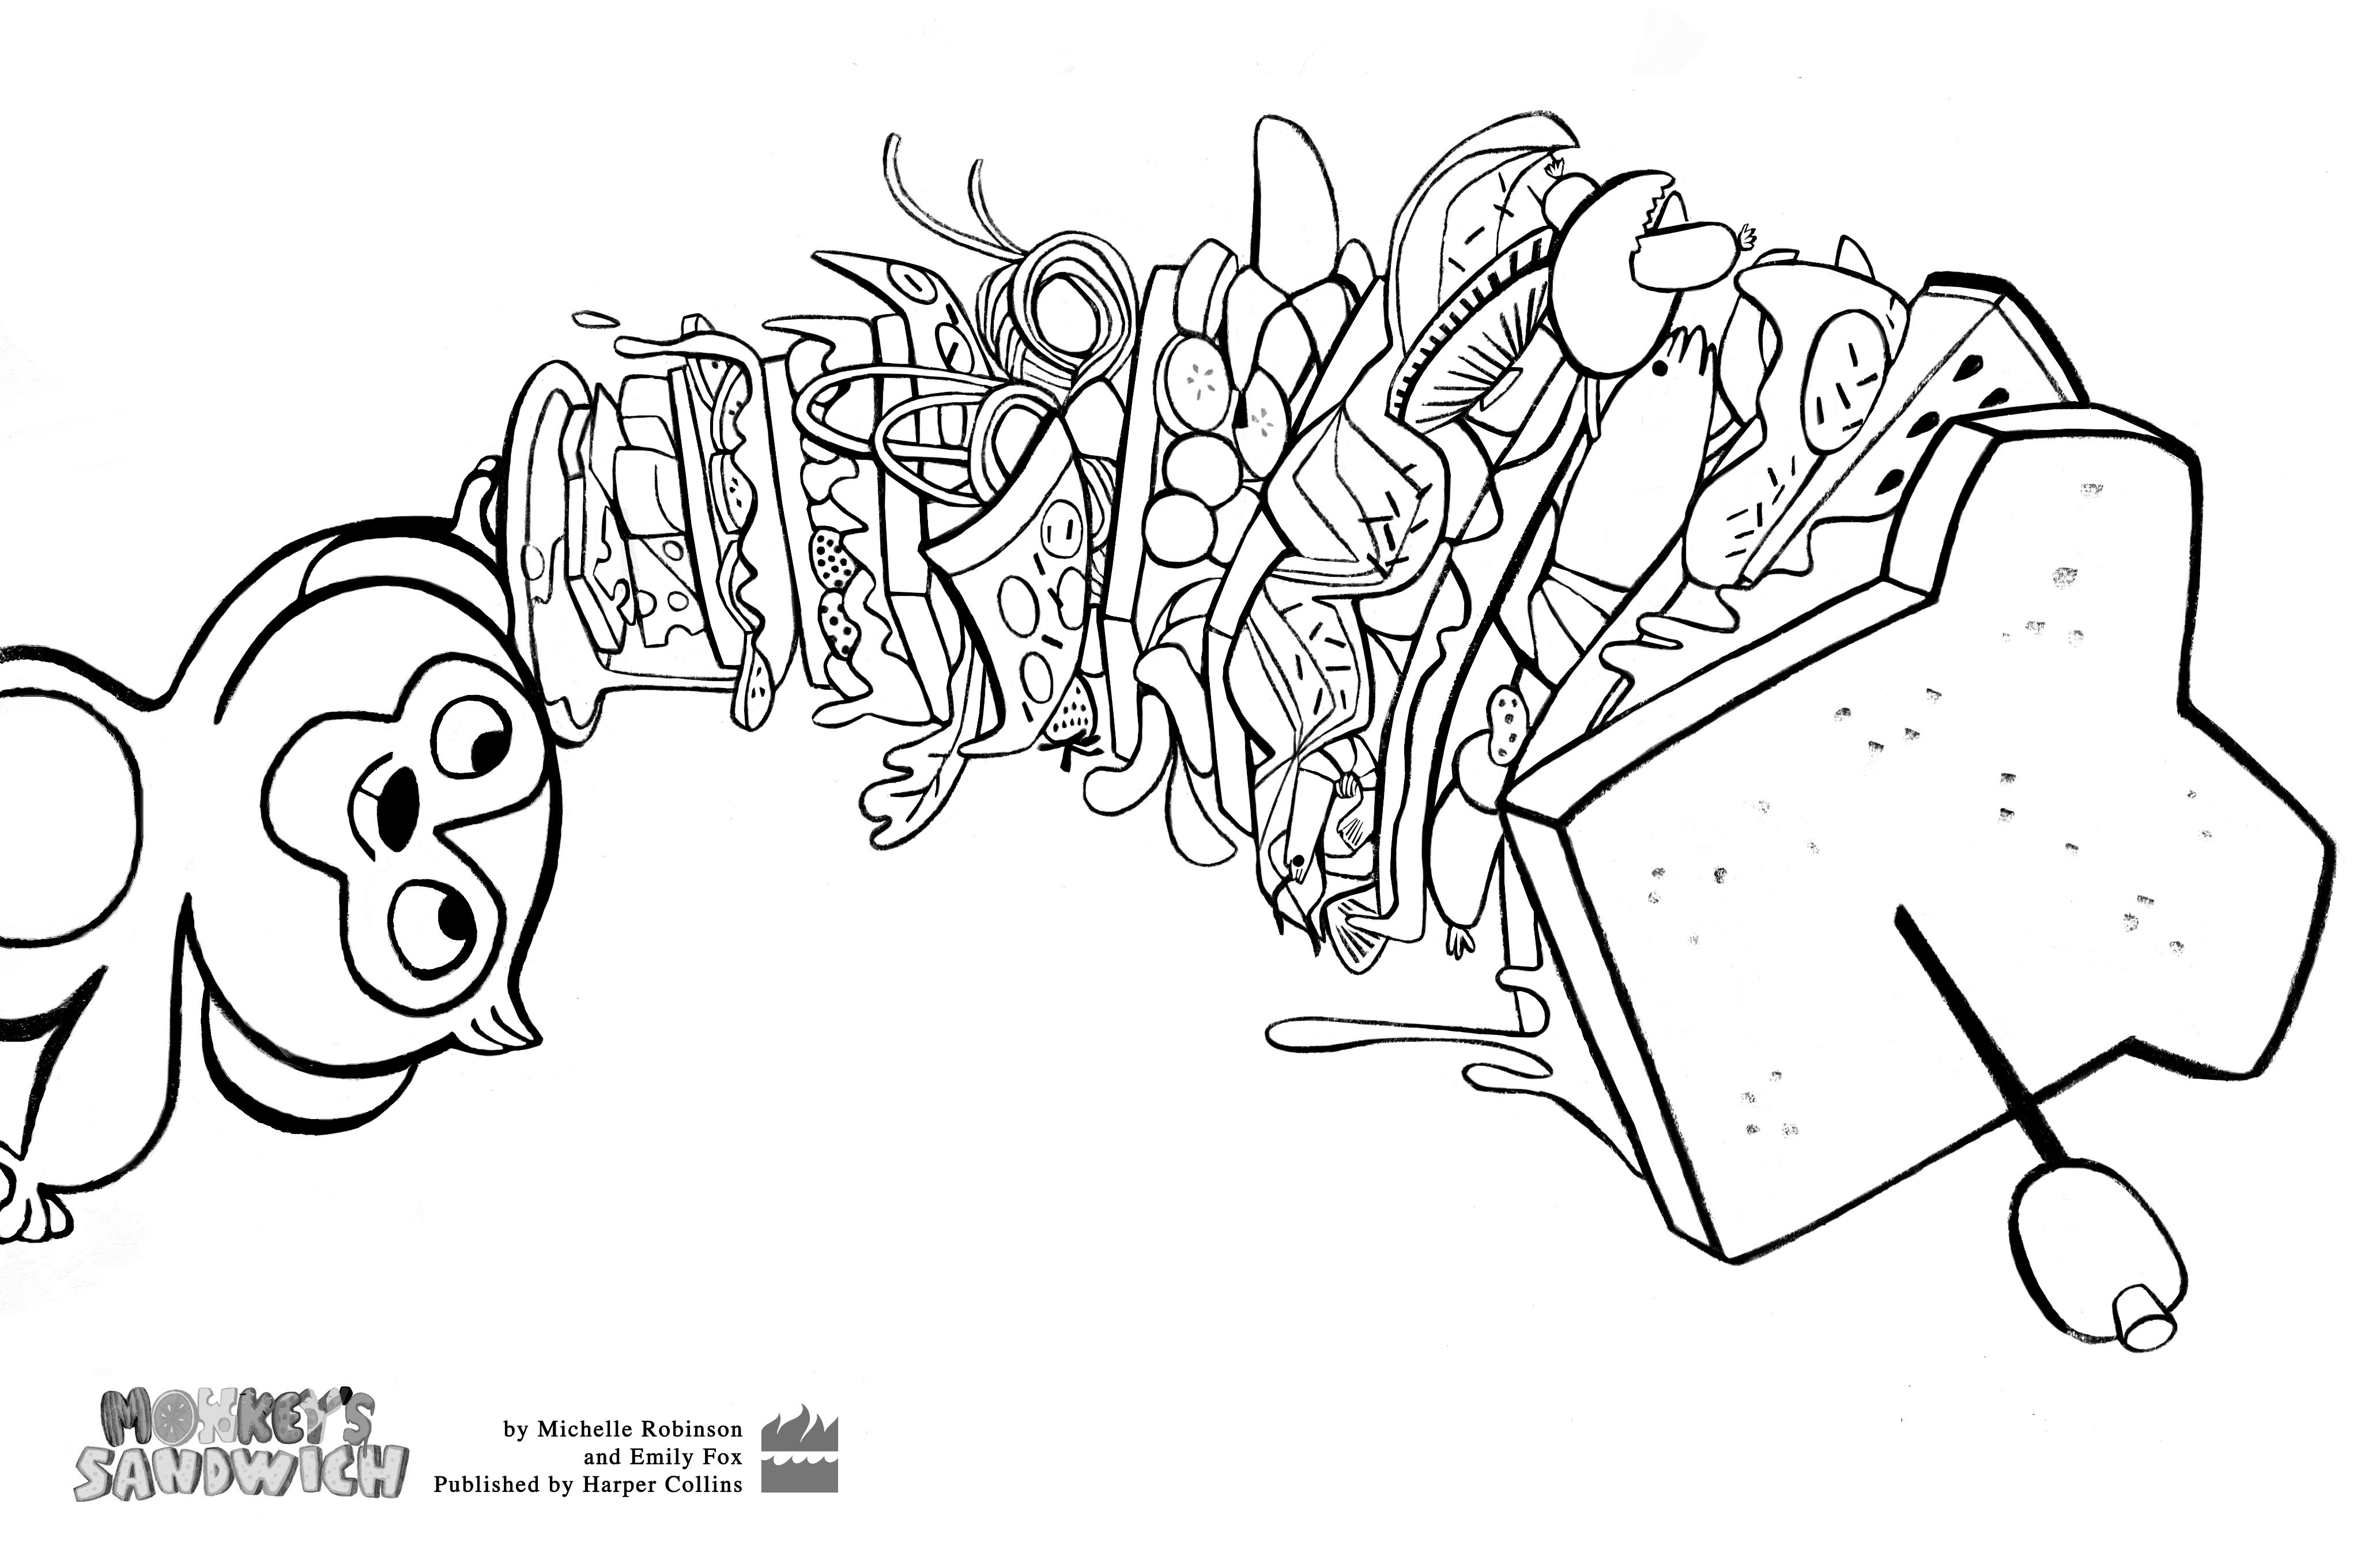 Colouring sheet for Monkey's Sandwich. It shows monkey holding aloft a huge, towering, multi-layered sandwich.